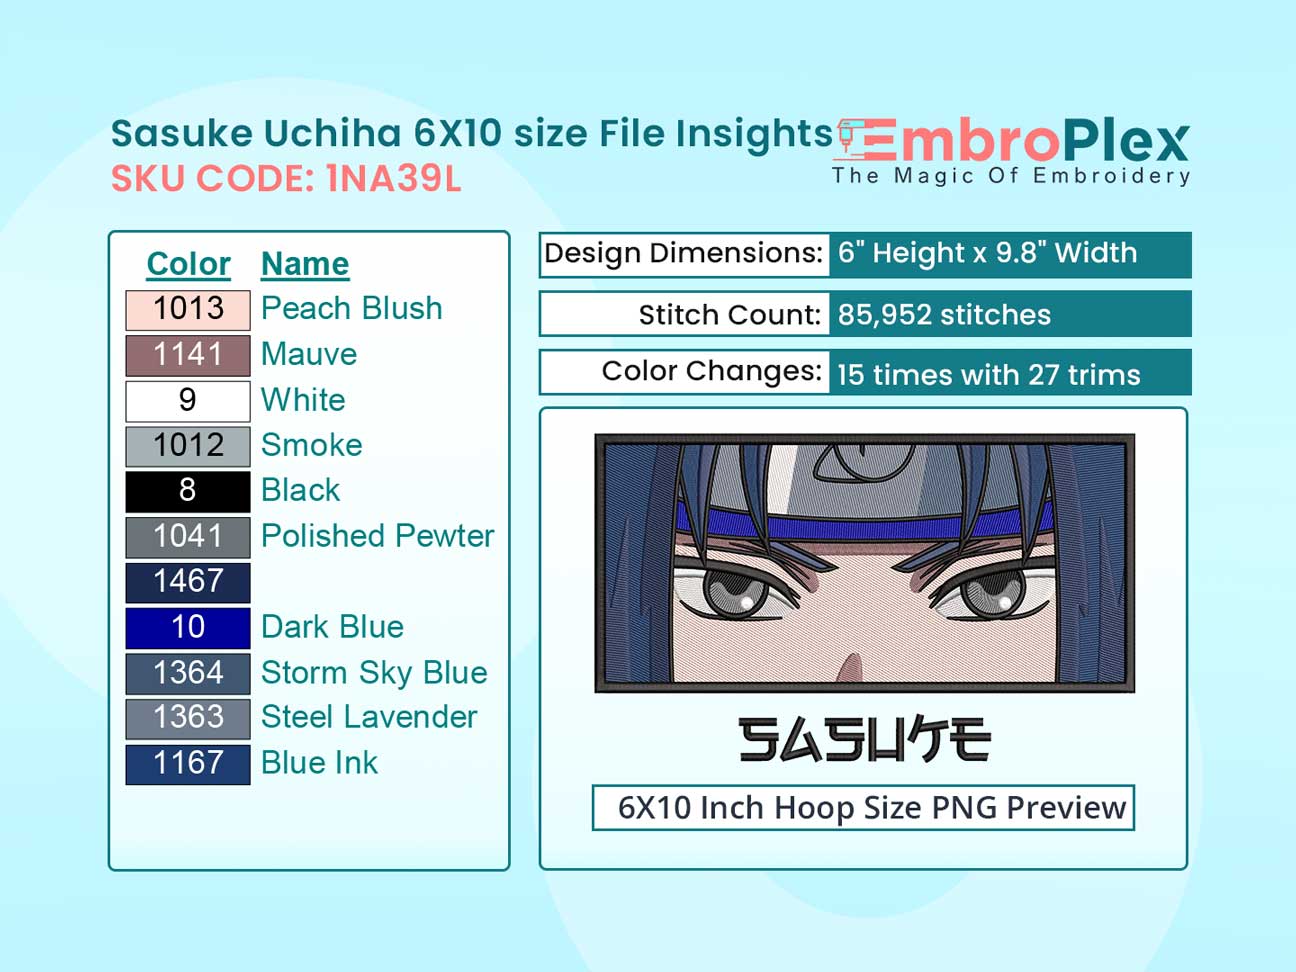 Anime-Inspired Sasuke Uchiha Embroidery Design File - 6x10 Inch hoop Size Variation overview image